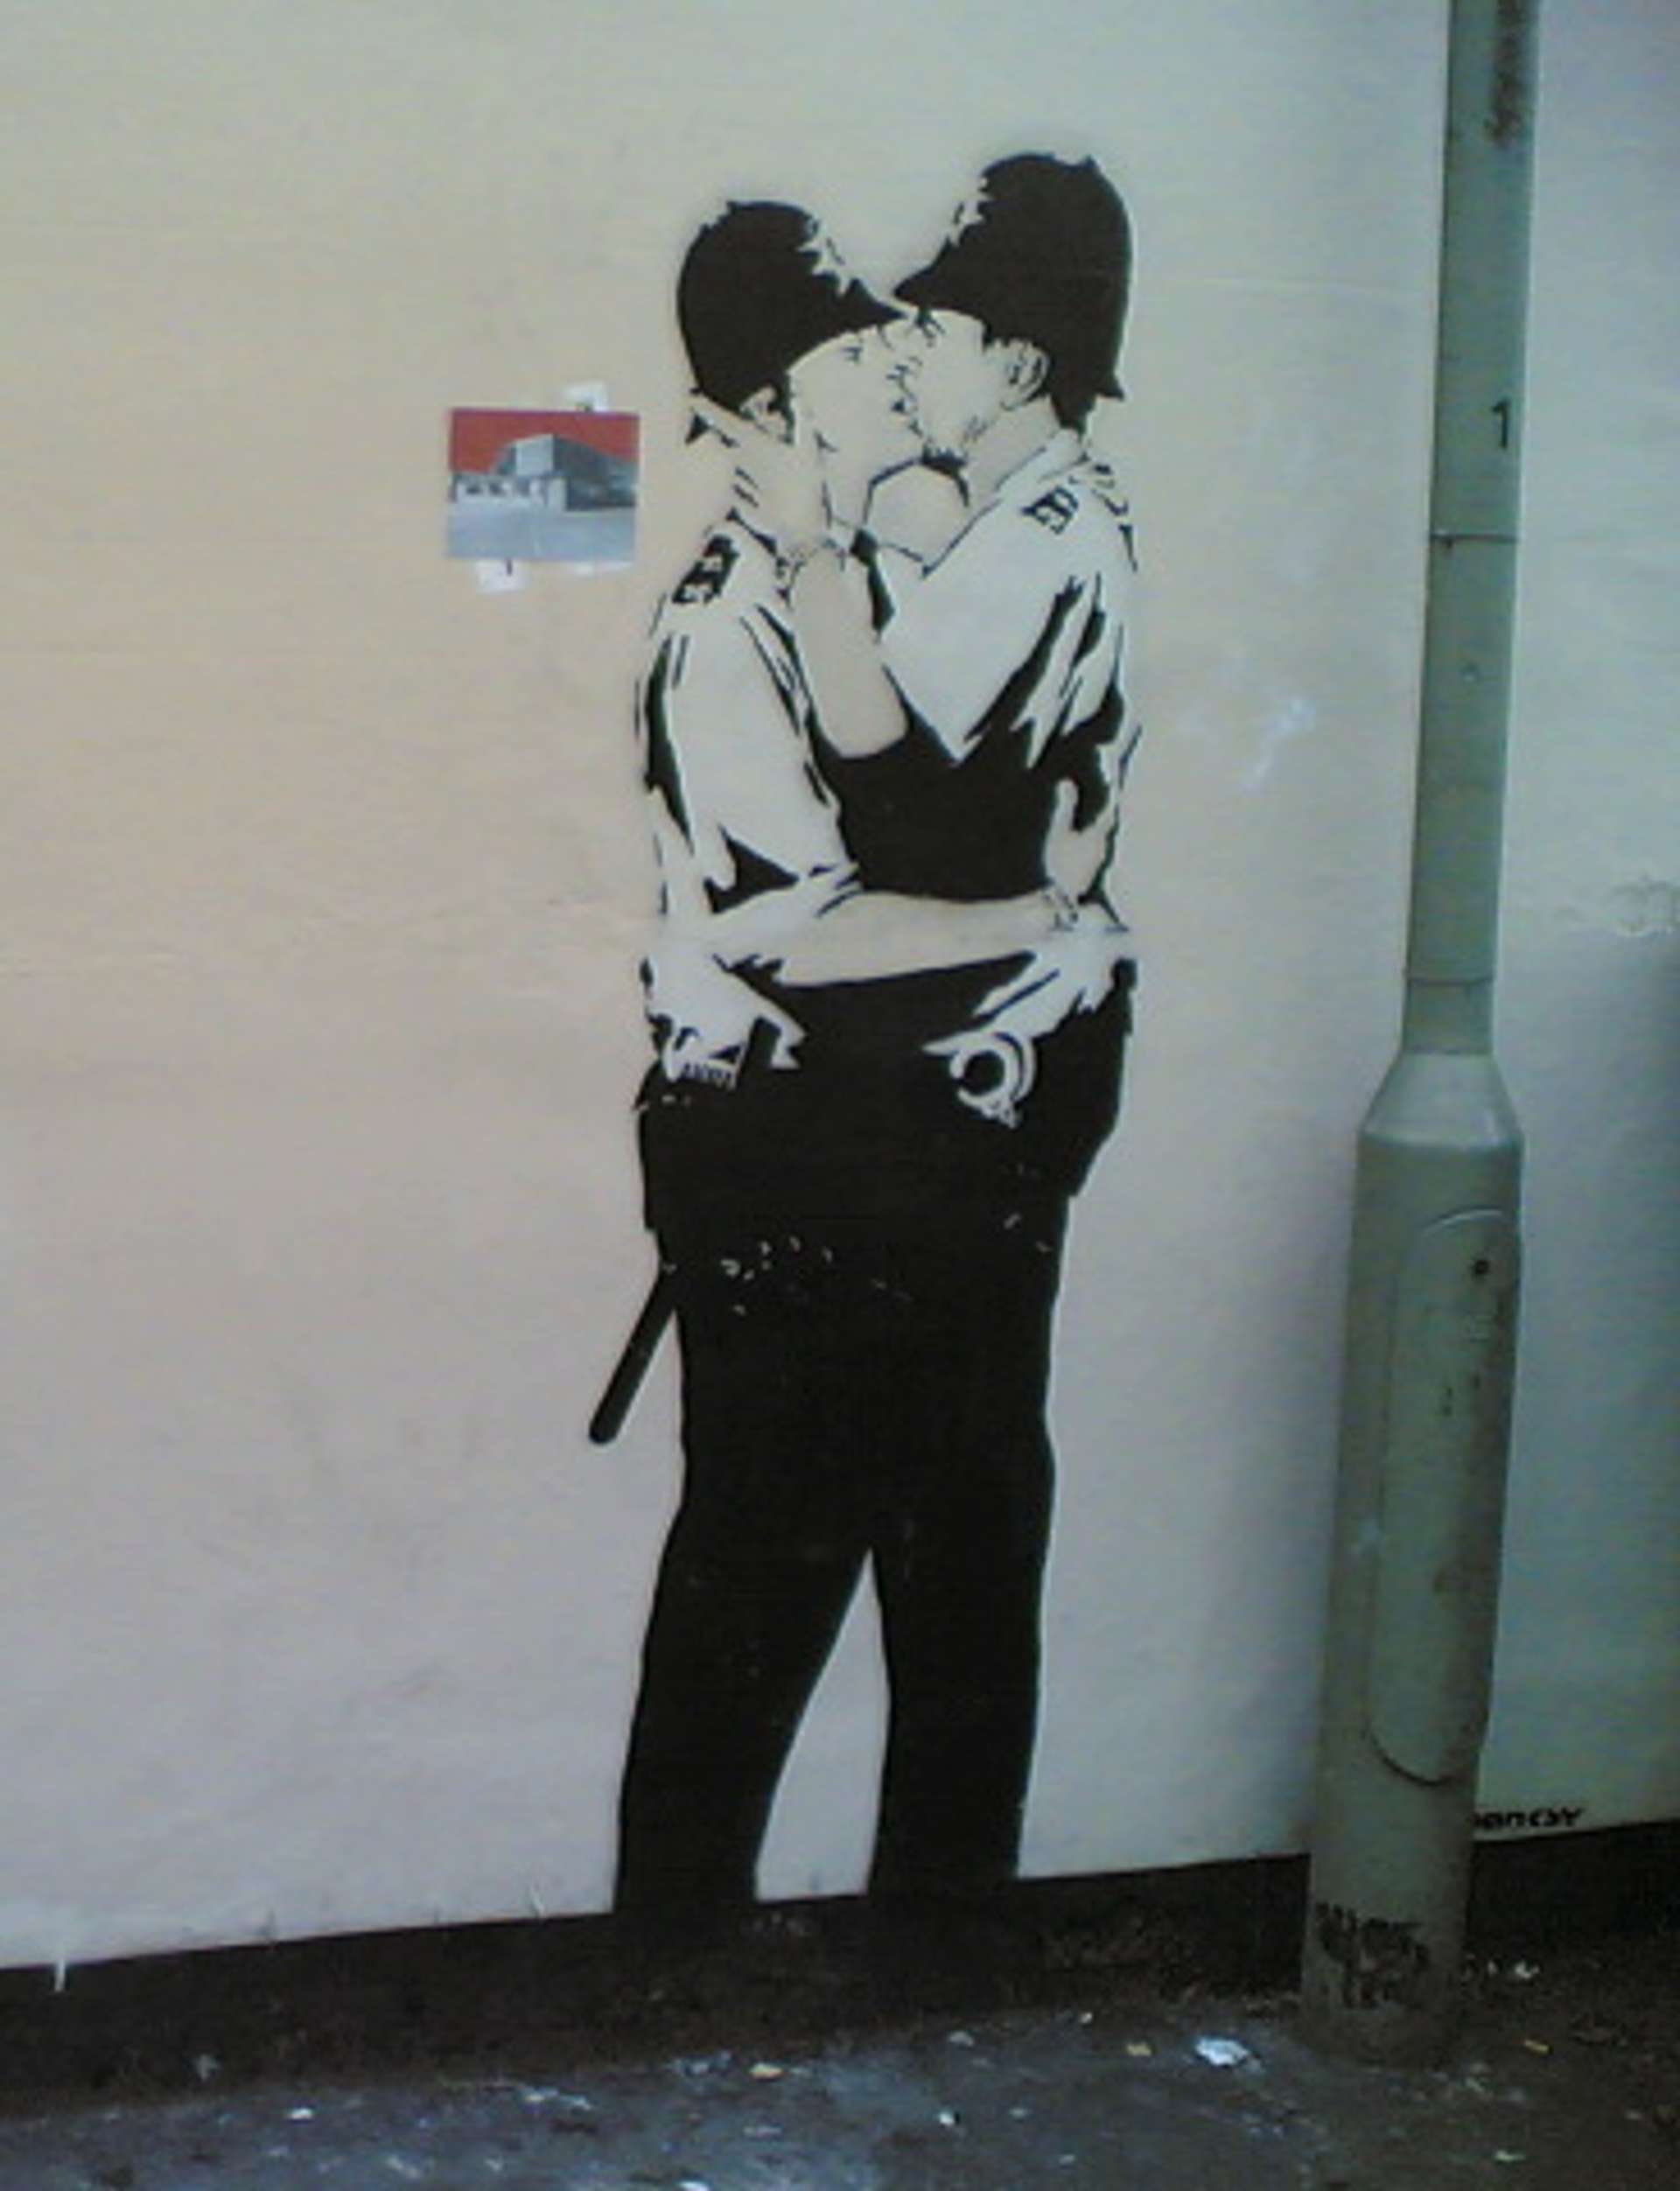 An image of the mural Kissing Coppers by Banksy. It shows two uniformed police officers locked in a passionate kiss.